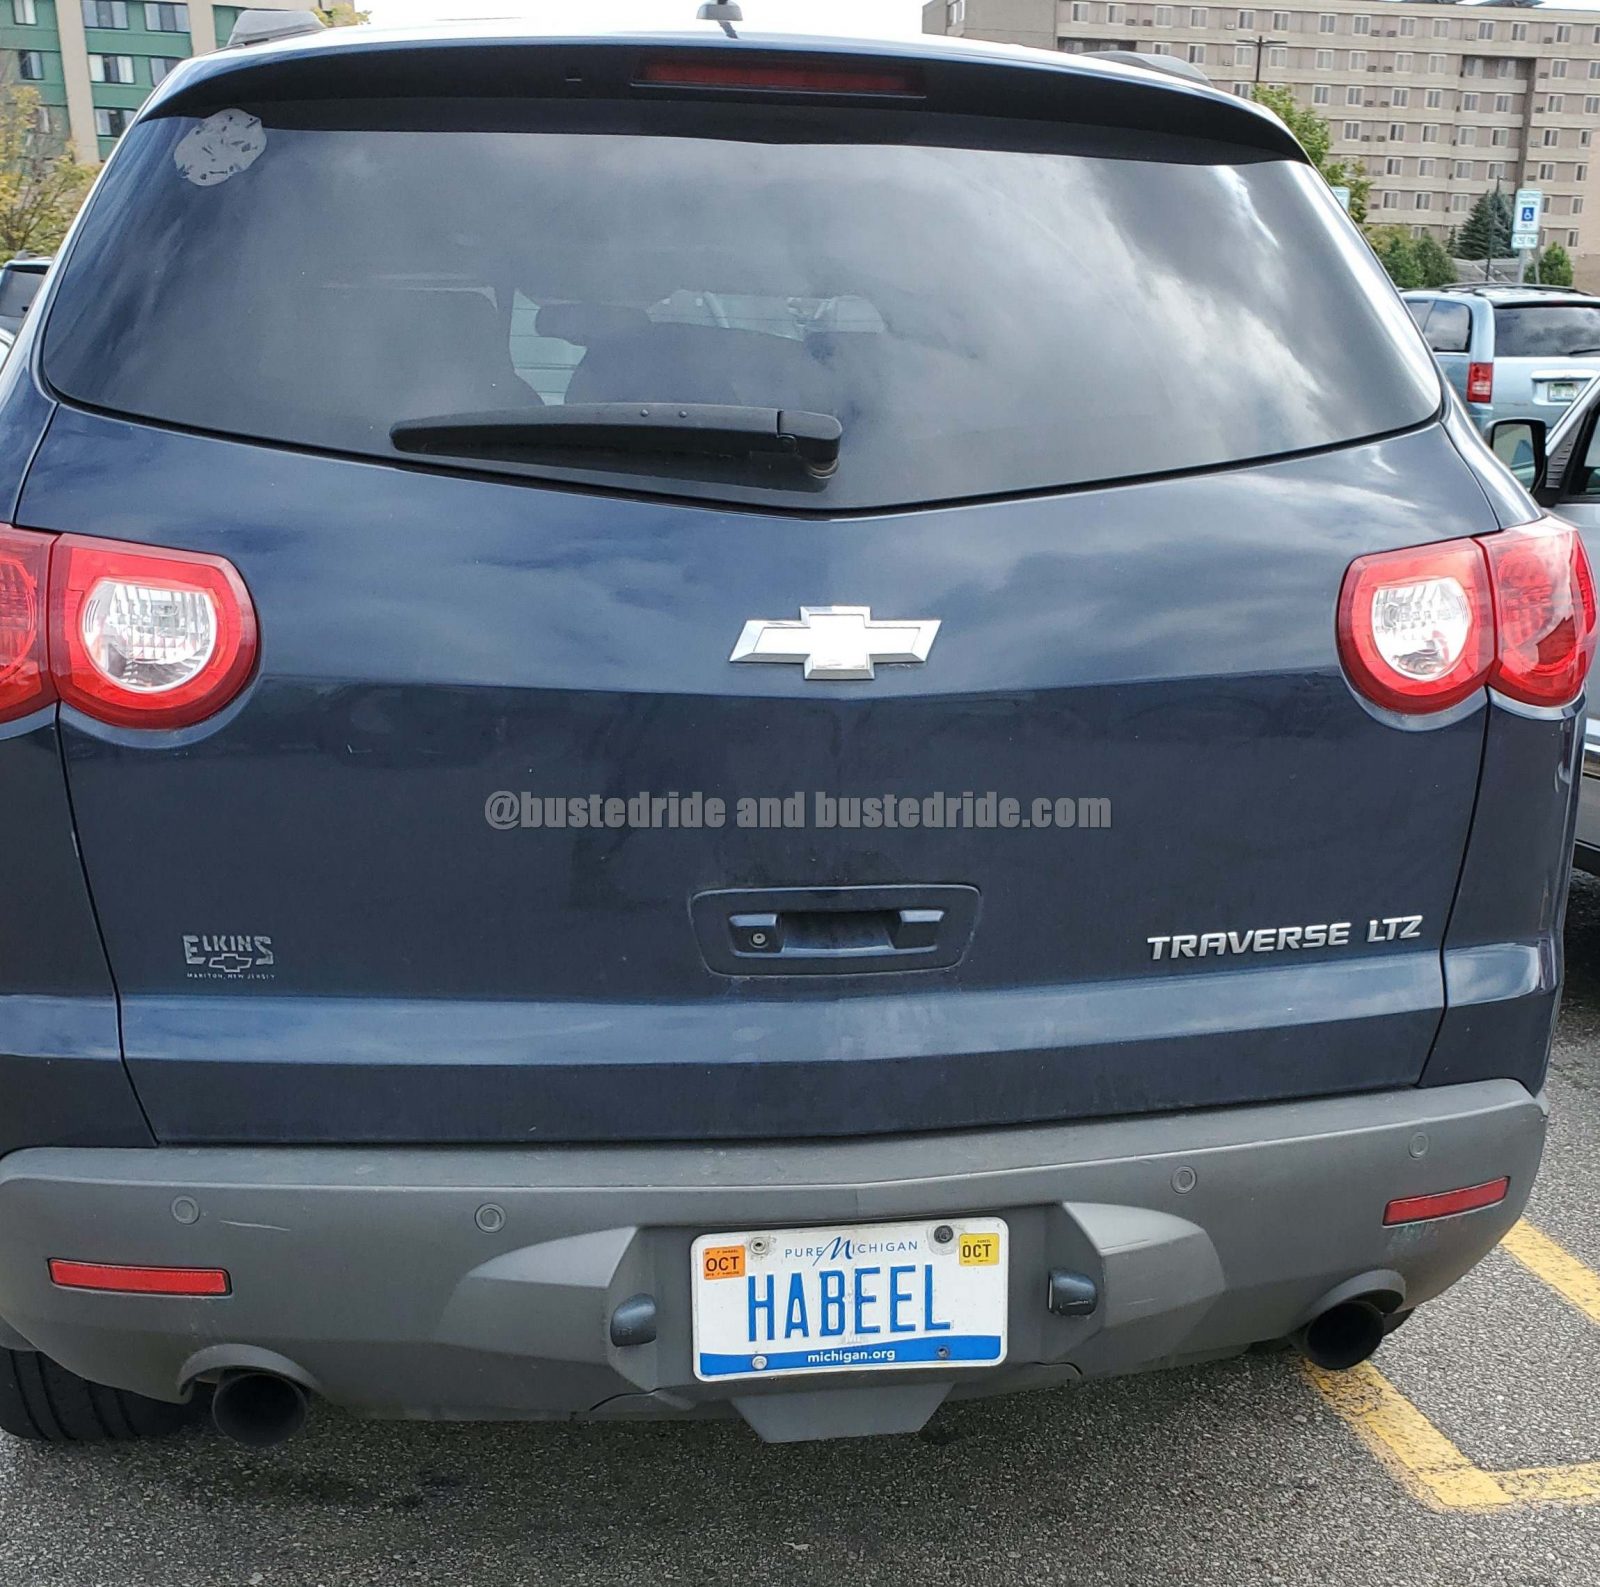 HABEEL - Vanity License Plate by Busted Ride